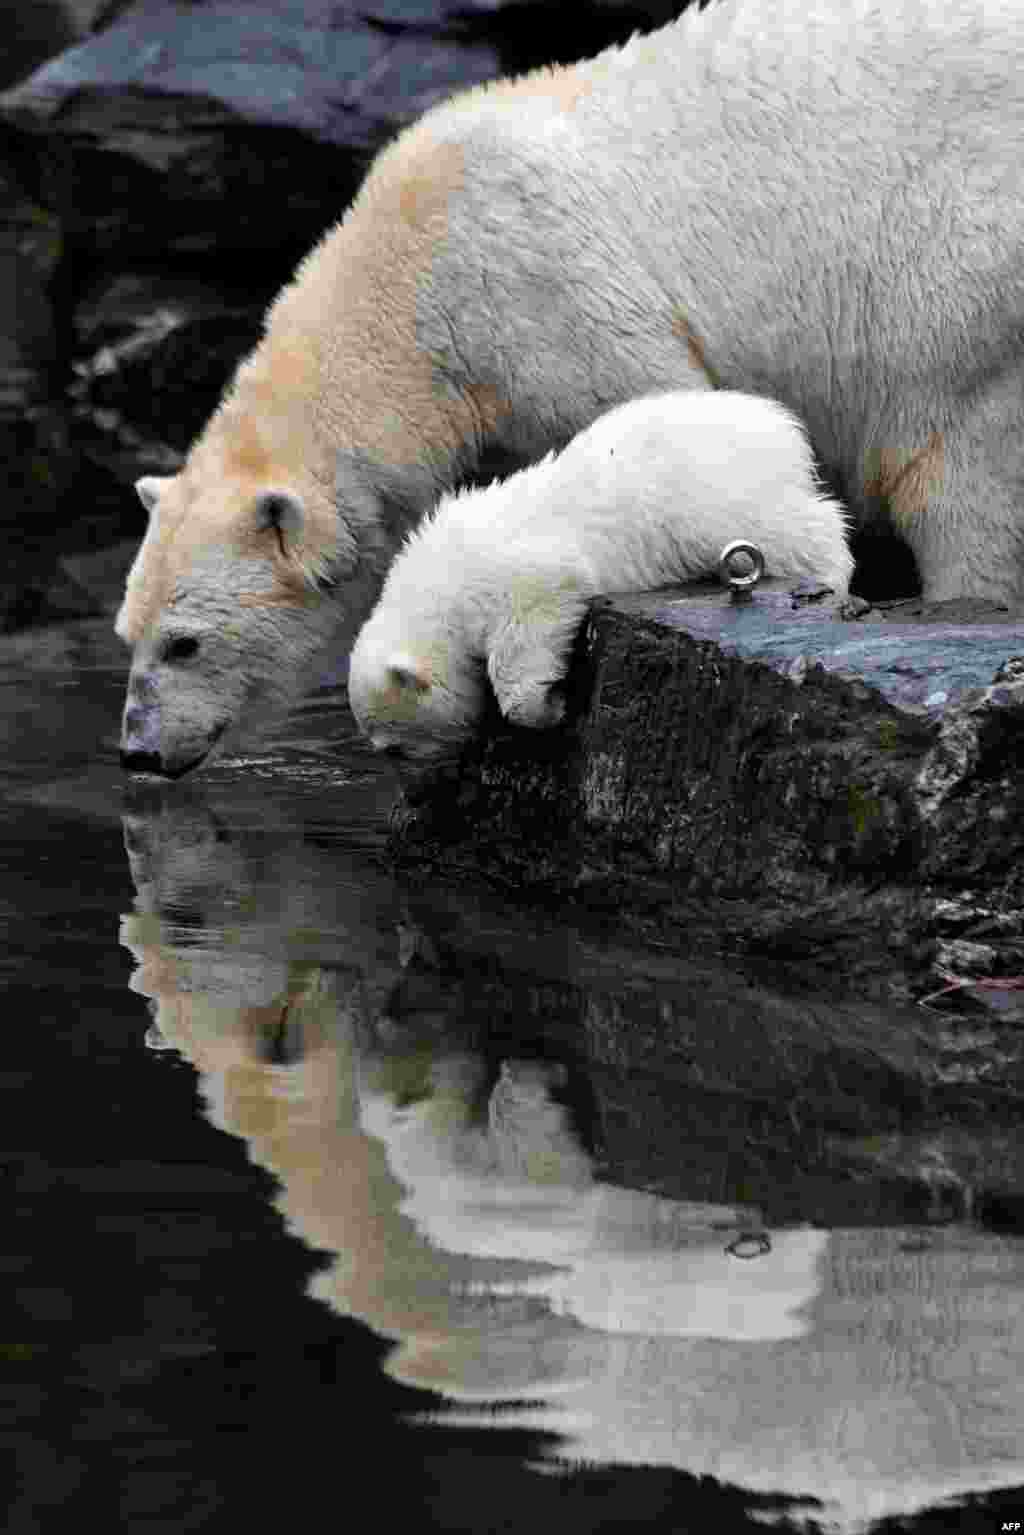 A polar bear cub and her mother Tonja are photographed at their enclosure as the baby is presented to the press after leaving the breeding burrow for the first time at the Tierpark zoo in Berlin.